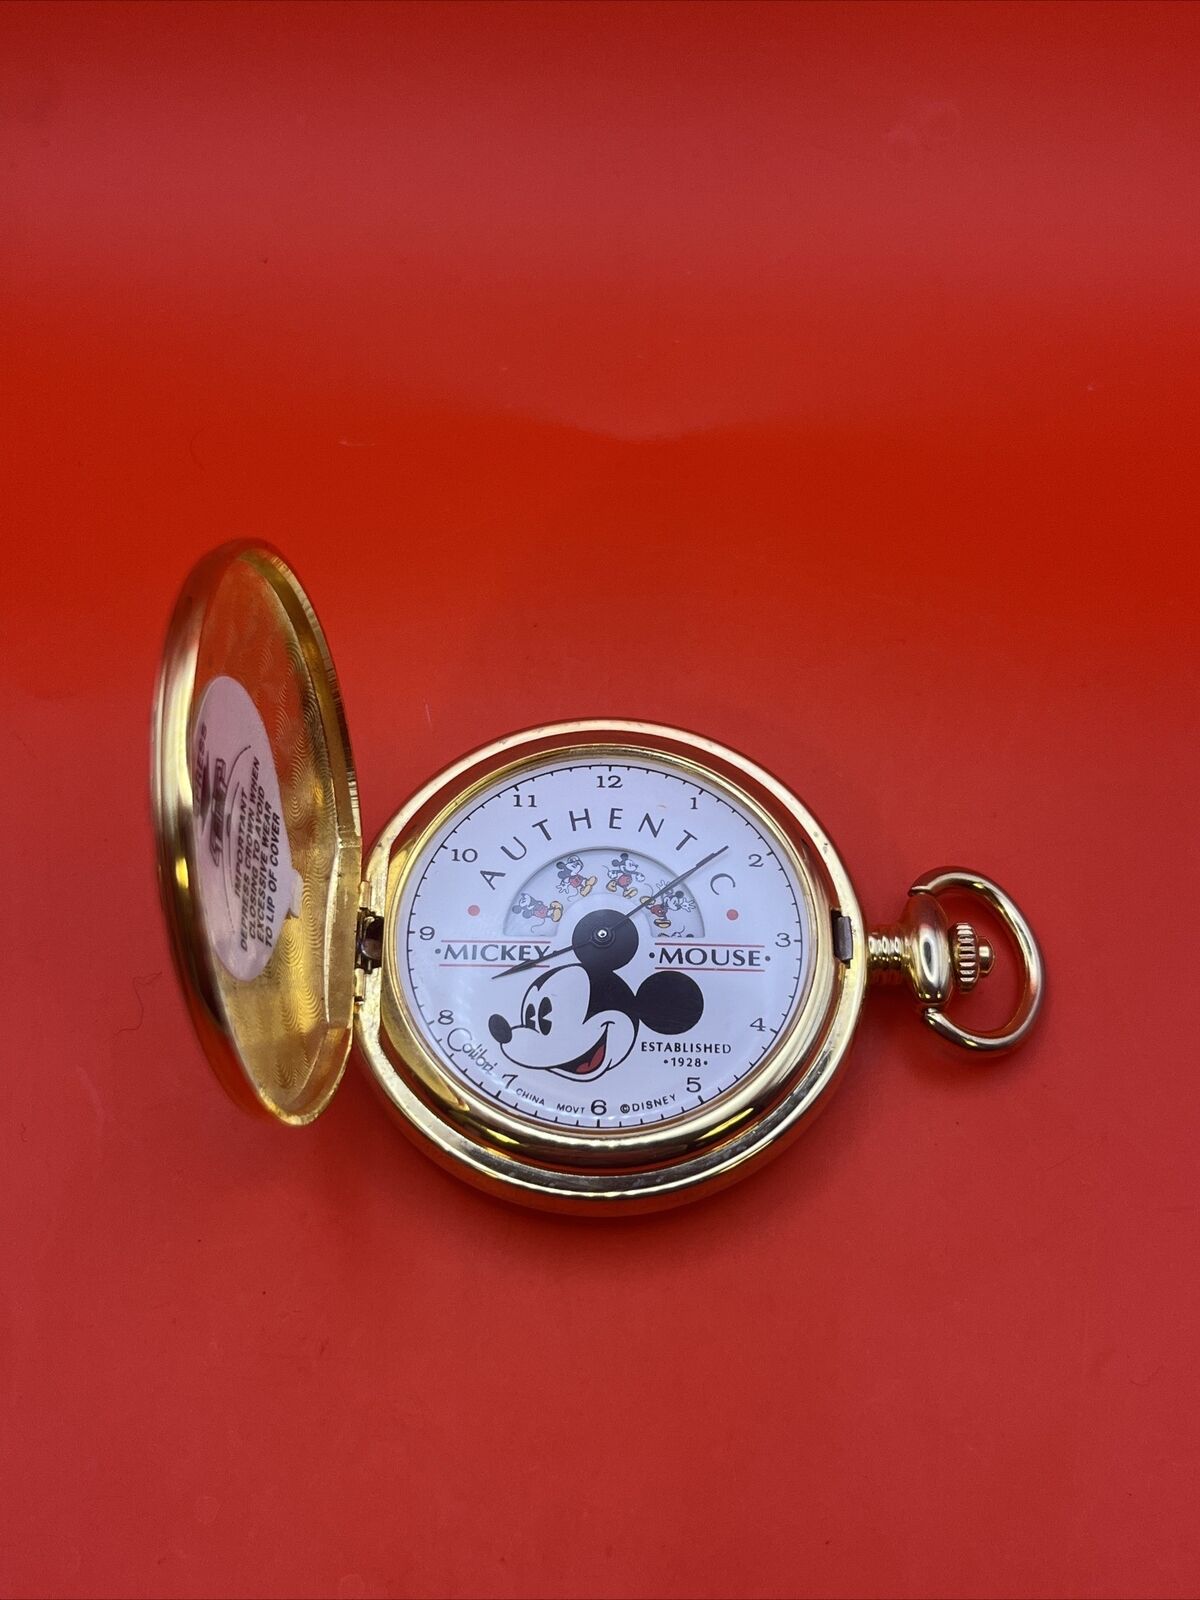 Extremely Rare Vintage Colibri Mickey Mouse Pocket Watch (WORKS PERFECTLY)